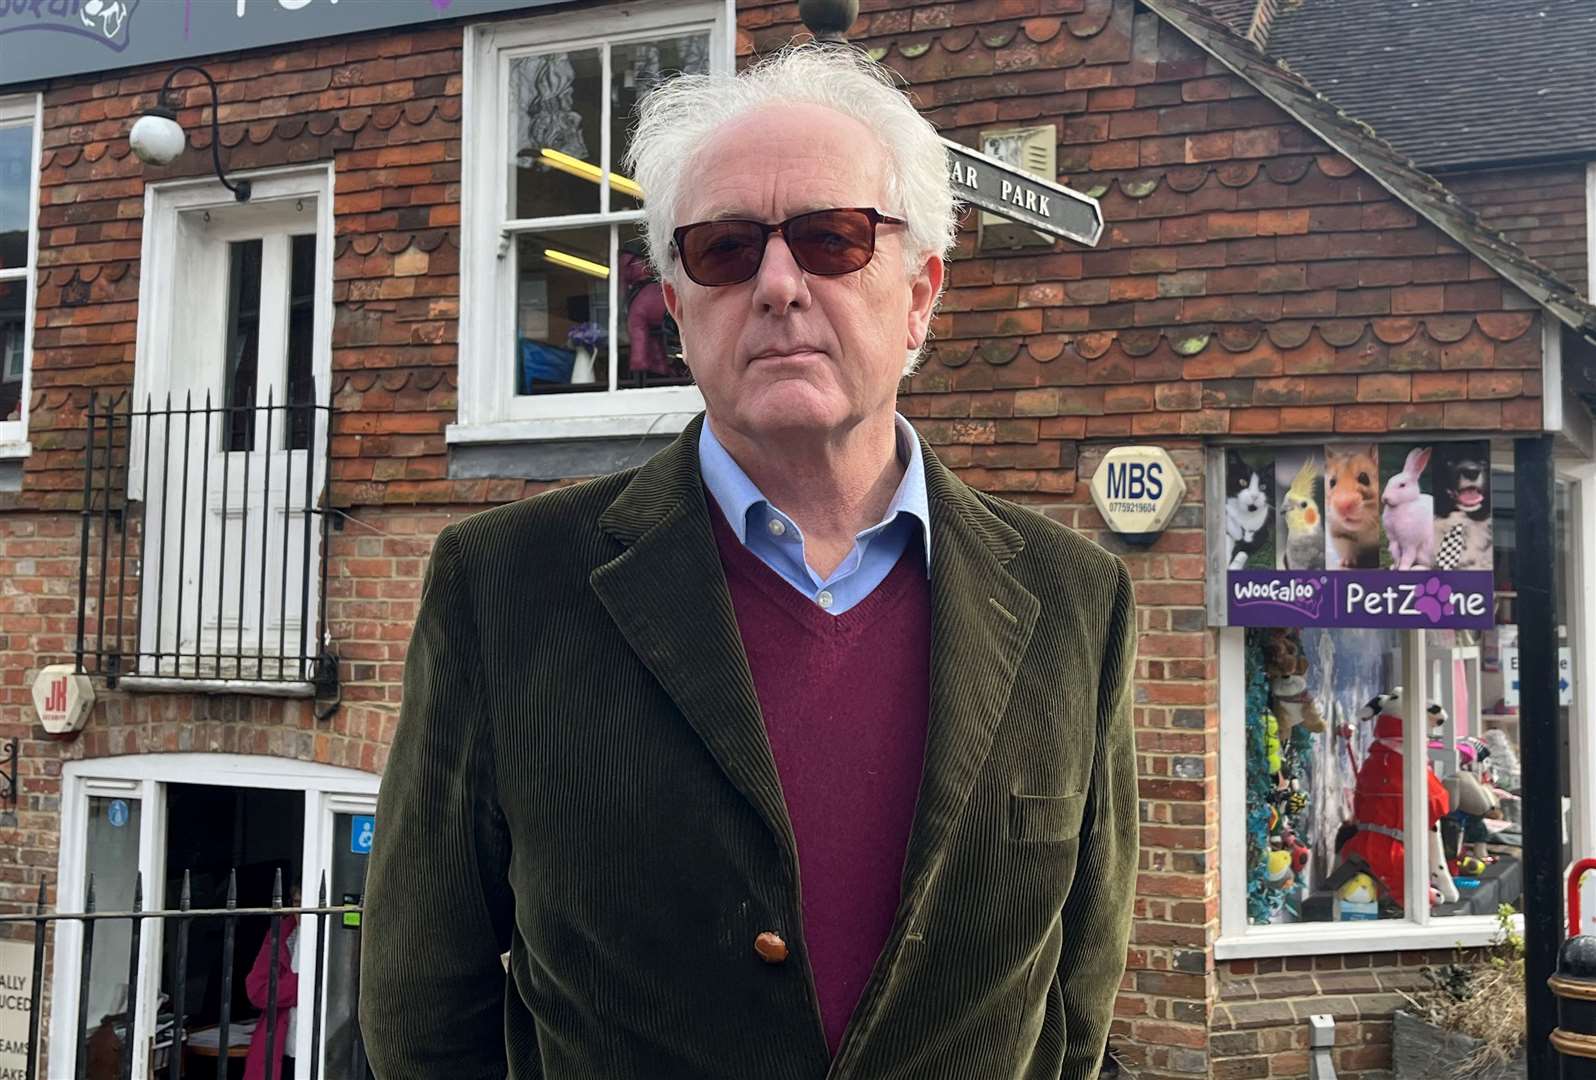 Christopher Long, 65, wants to see Tenterden reinvigorated